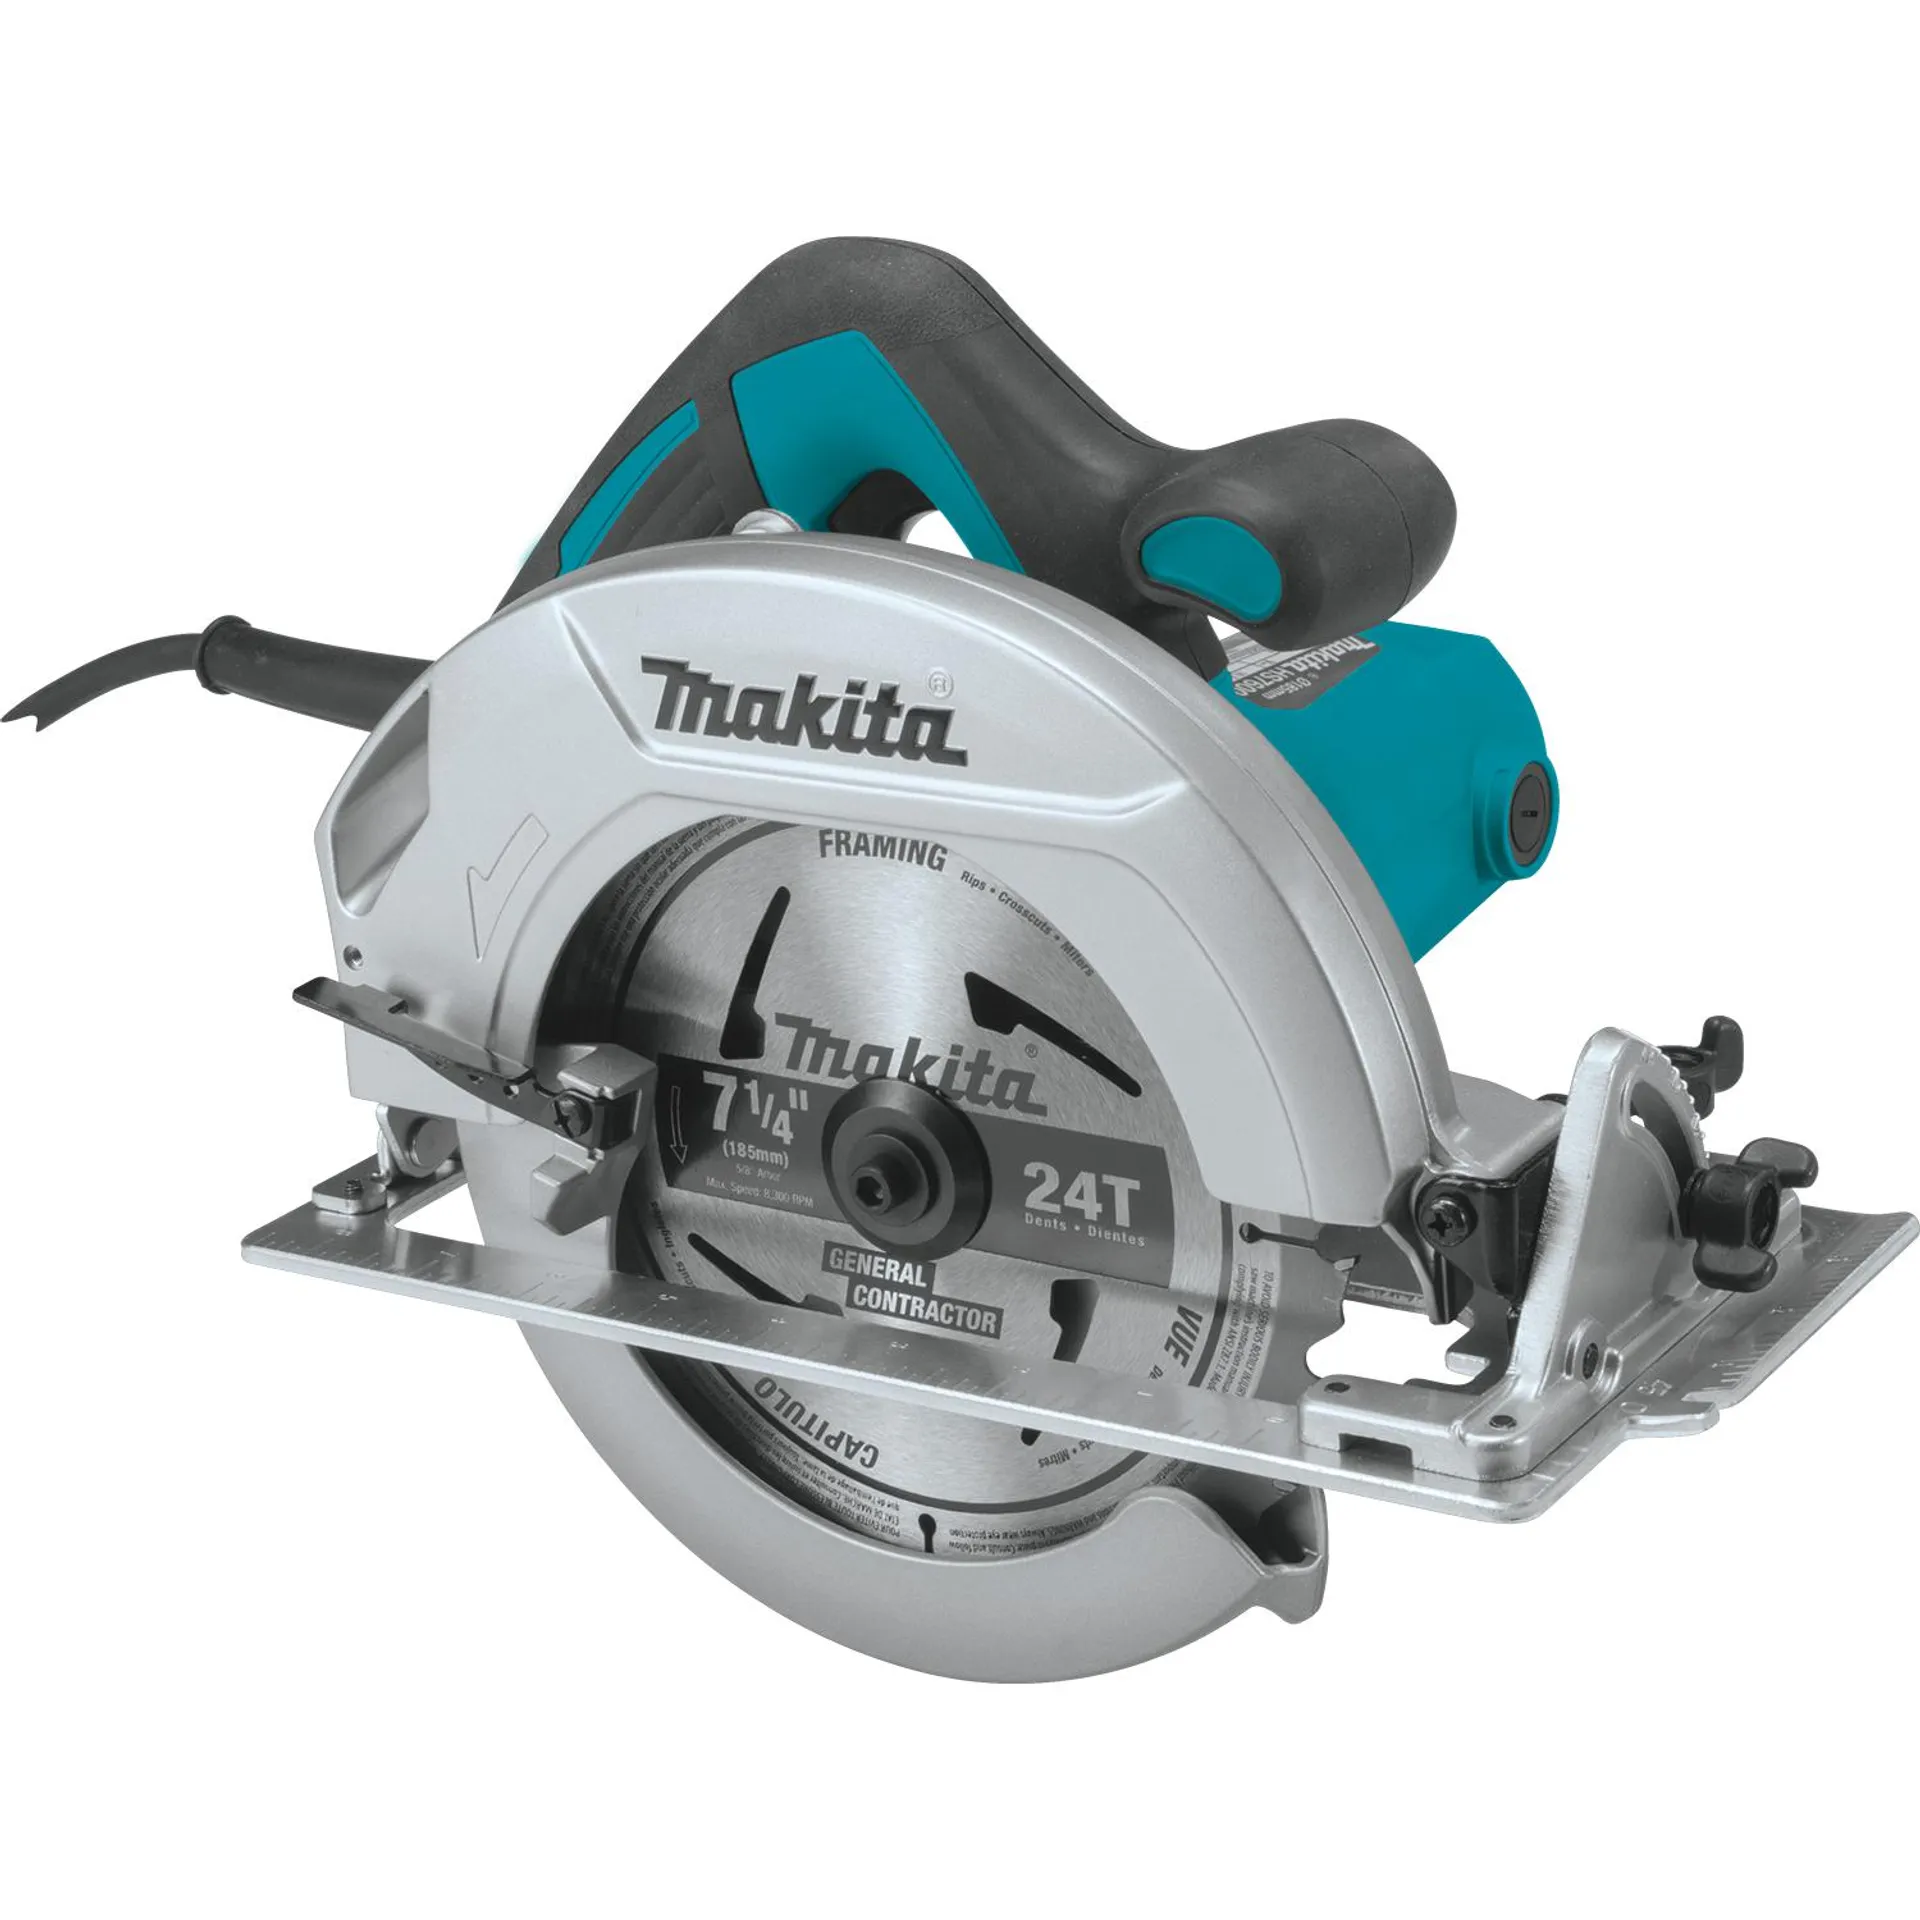 HS7600 Circular Saw, 10.5 A, 7-1/4 in Dia Blade, 5/8 in Arbor, 0 to 45 deg Bevel